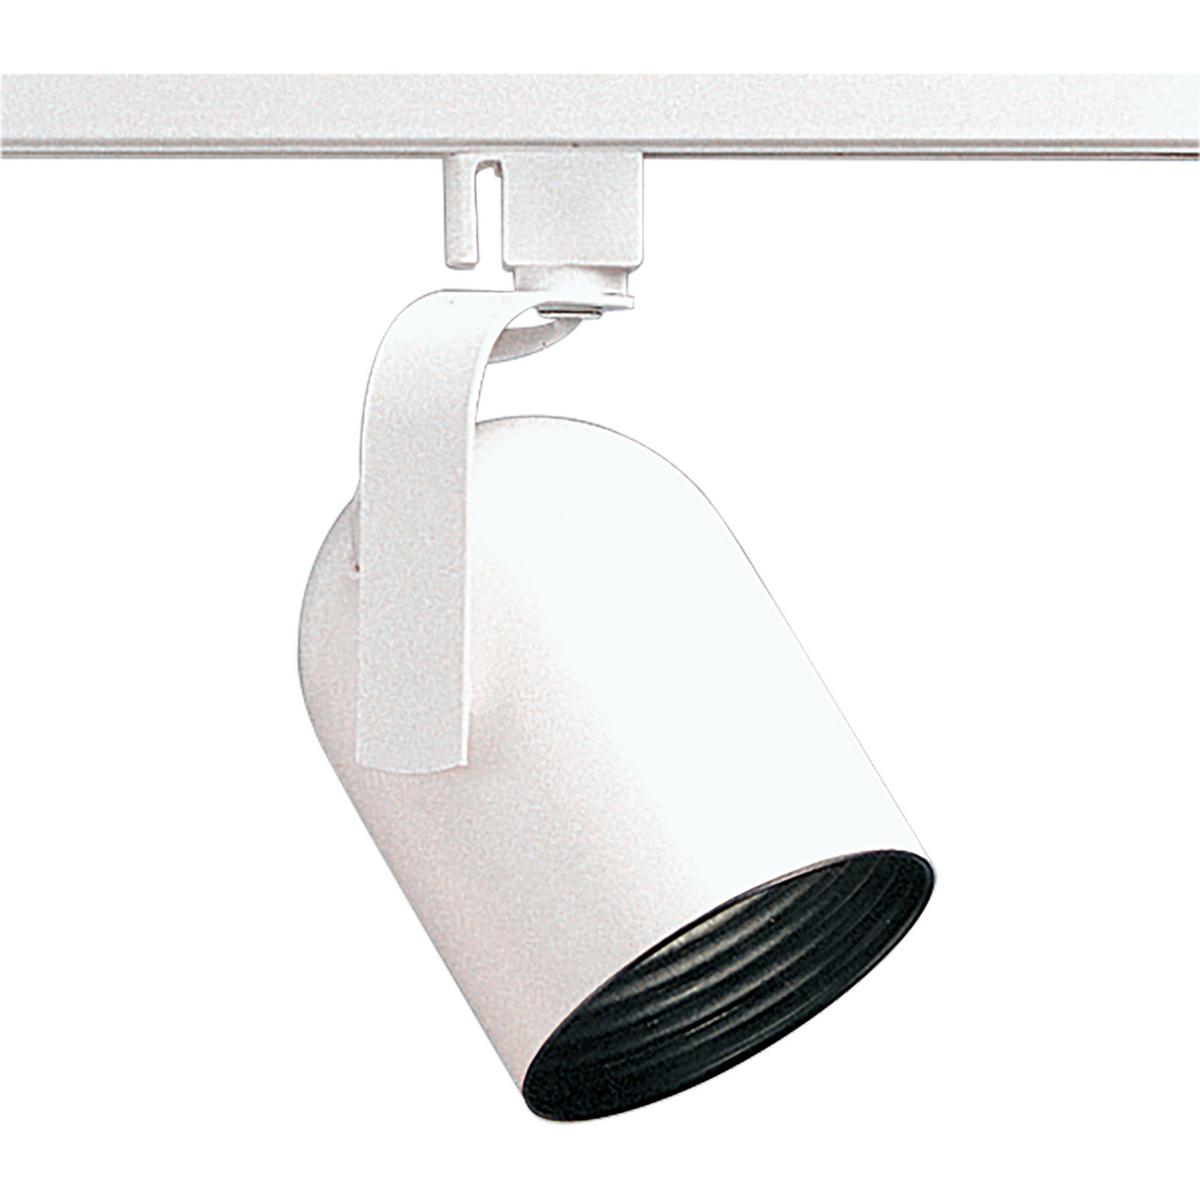 White Round Back Alpha Trak track head with 360 degree horizontal rotation and 90 degree vertical rotation and black baffle. Heads can be easily repositioned on the track to provide lighting in different areas of the room. Excellent for both residential and retail locations. Universal track head accepts medium base PAR 20, R 20 or PAR 16, bulb.